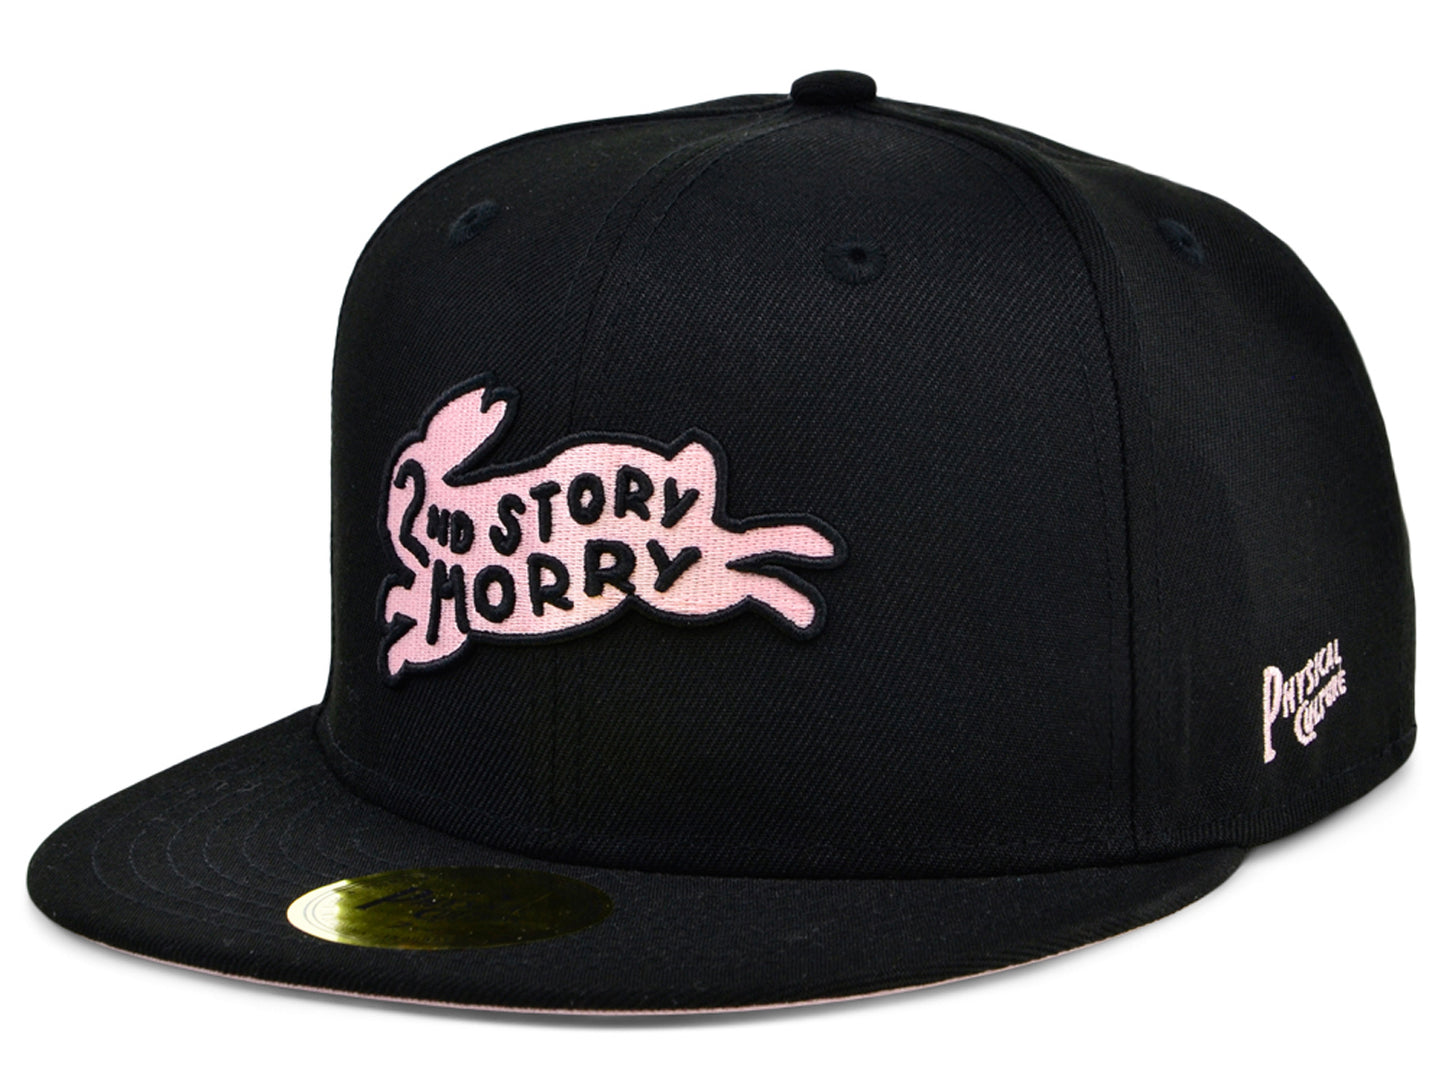 2nd Story Morry Fitted Cap